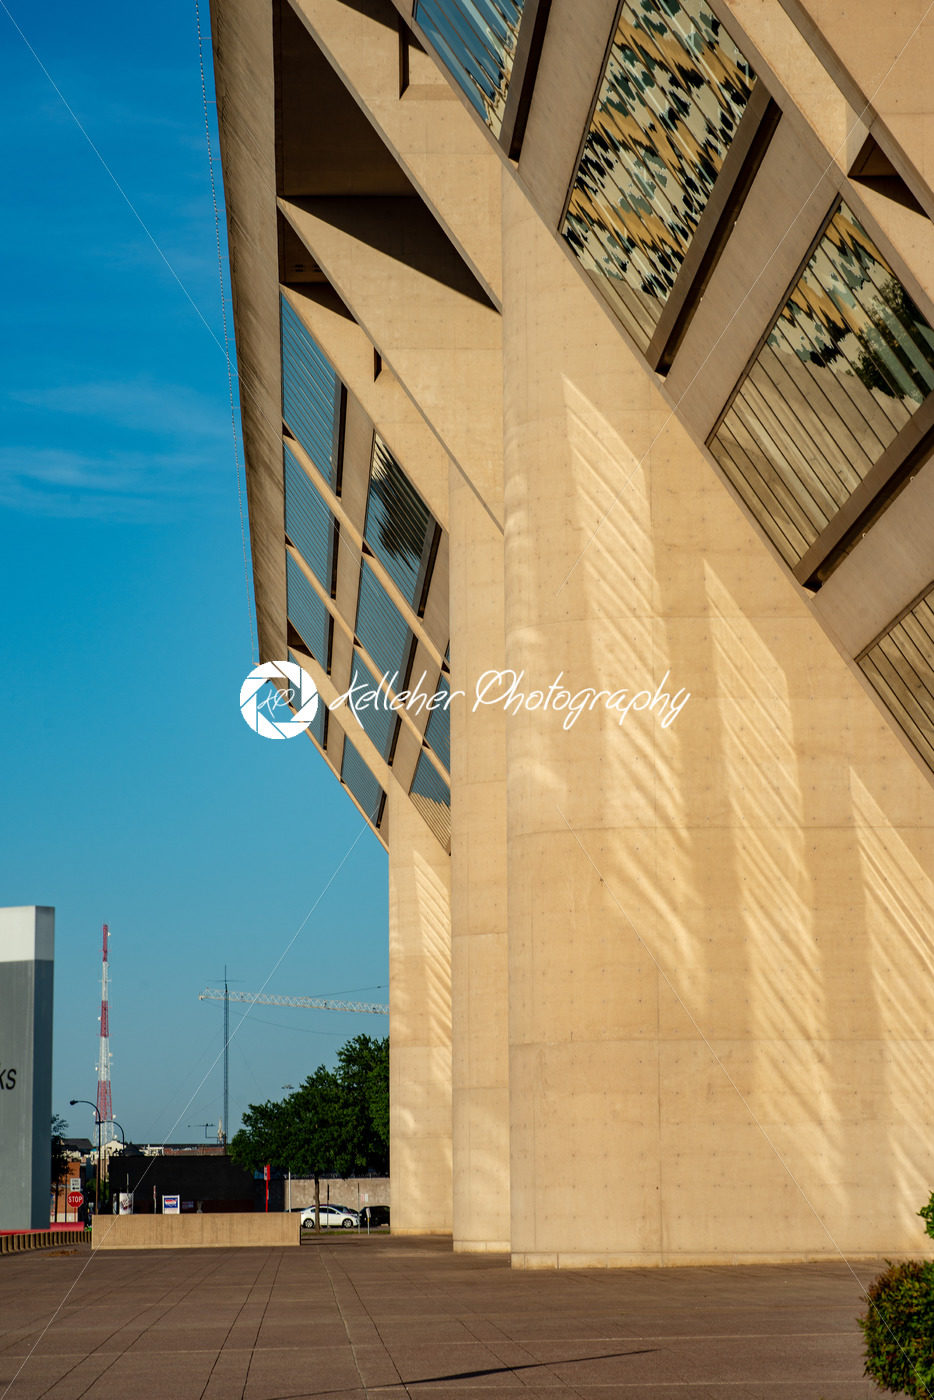 Dallas, Texas – May 7, 2018: Dallas City Hall, designed by renouned architect I. M. Pei, was used for the Robocop movies - Kelleher Photography Store